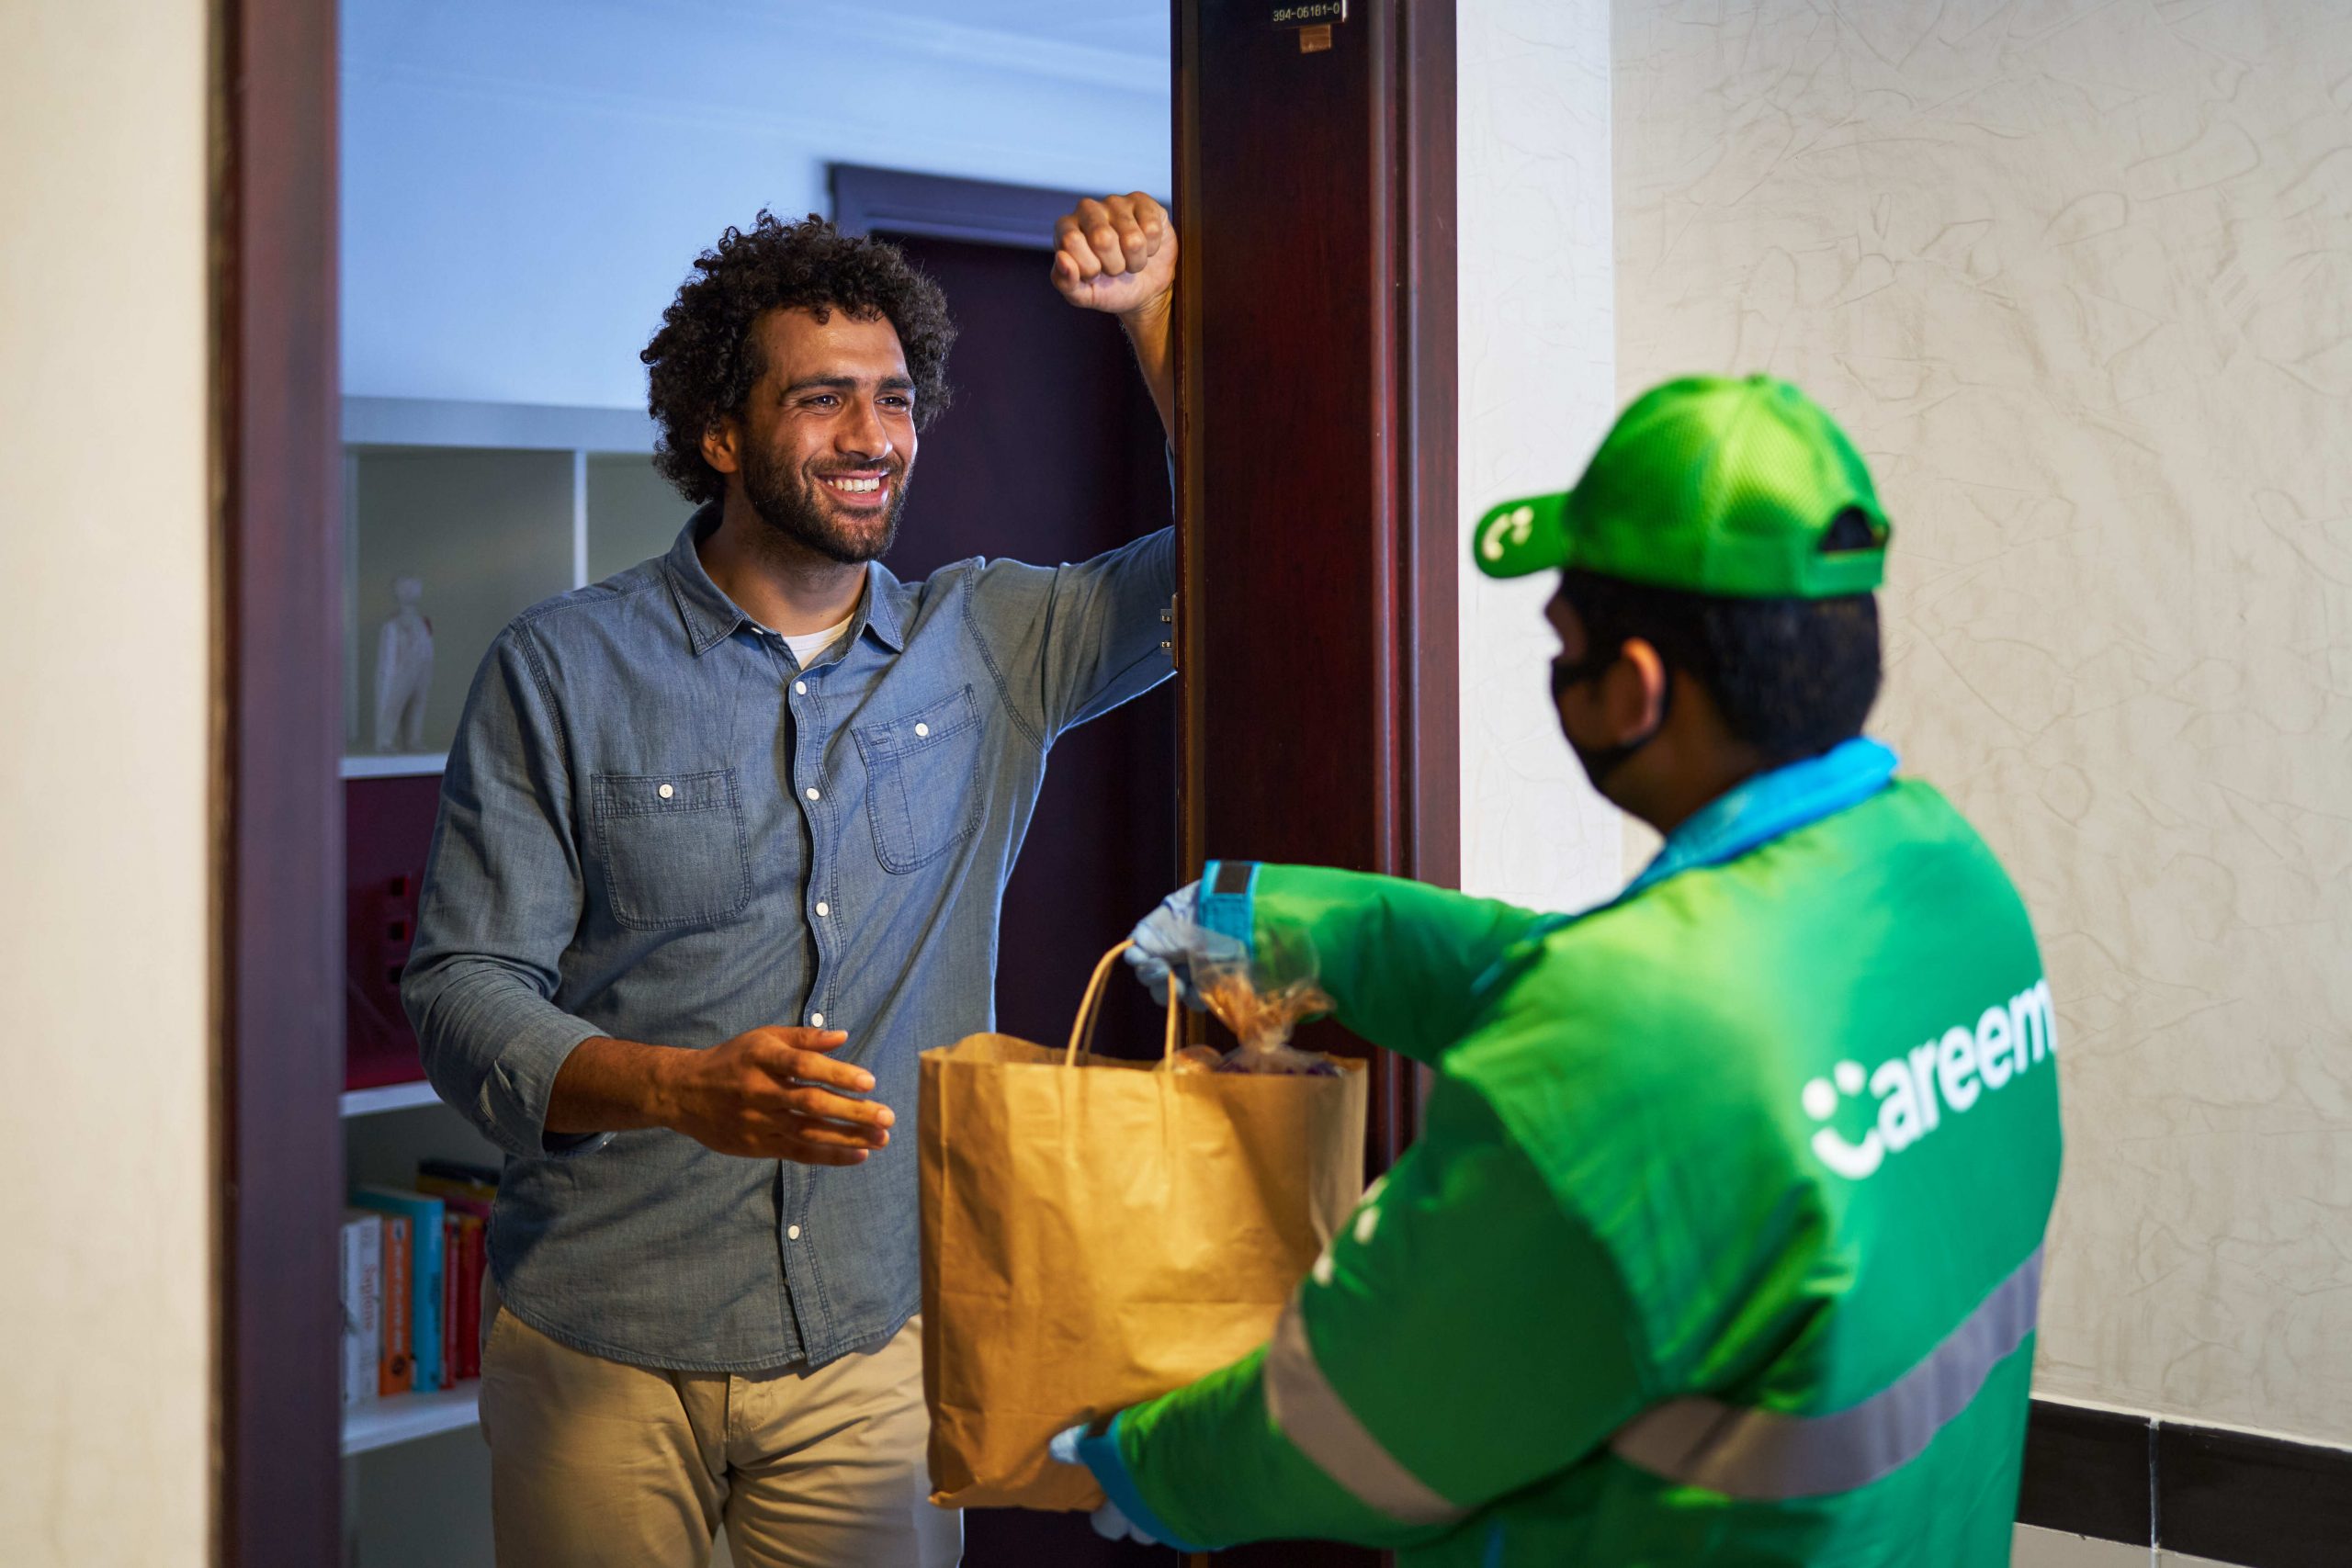 Careem launches food delivery service in Qatar - Doha News | Qatar